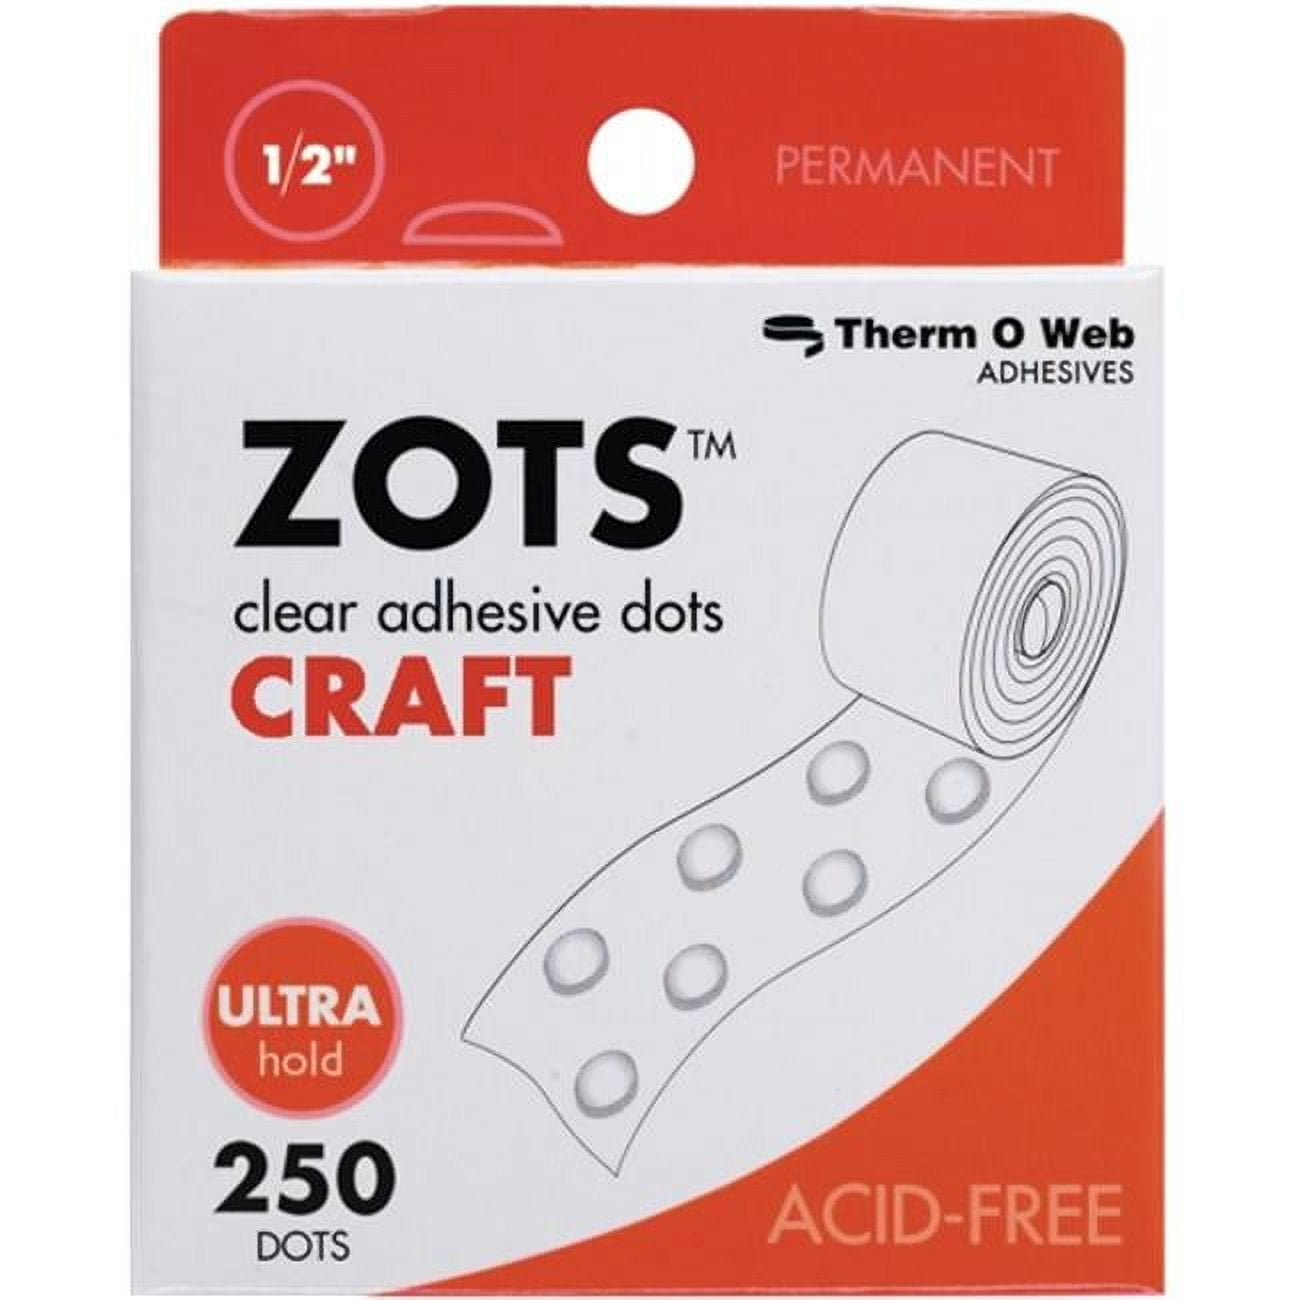 Zots Clear Adhesive Dots Roll 300 Count, Large